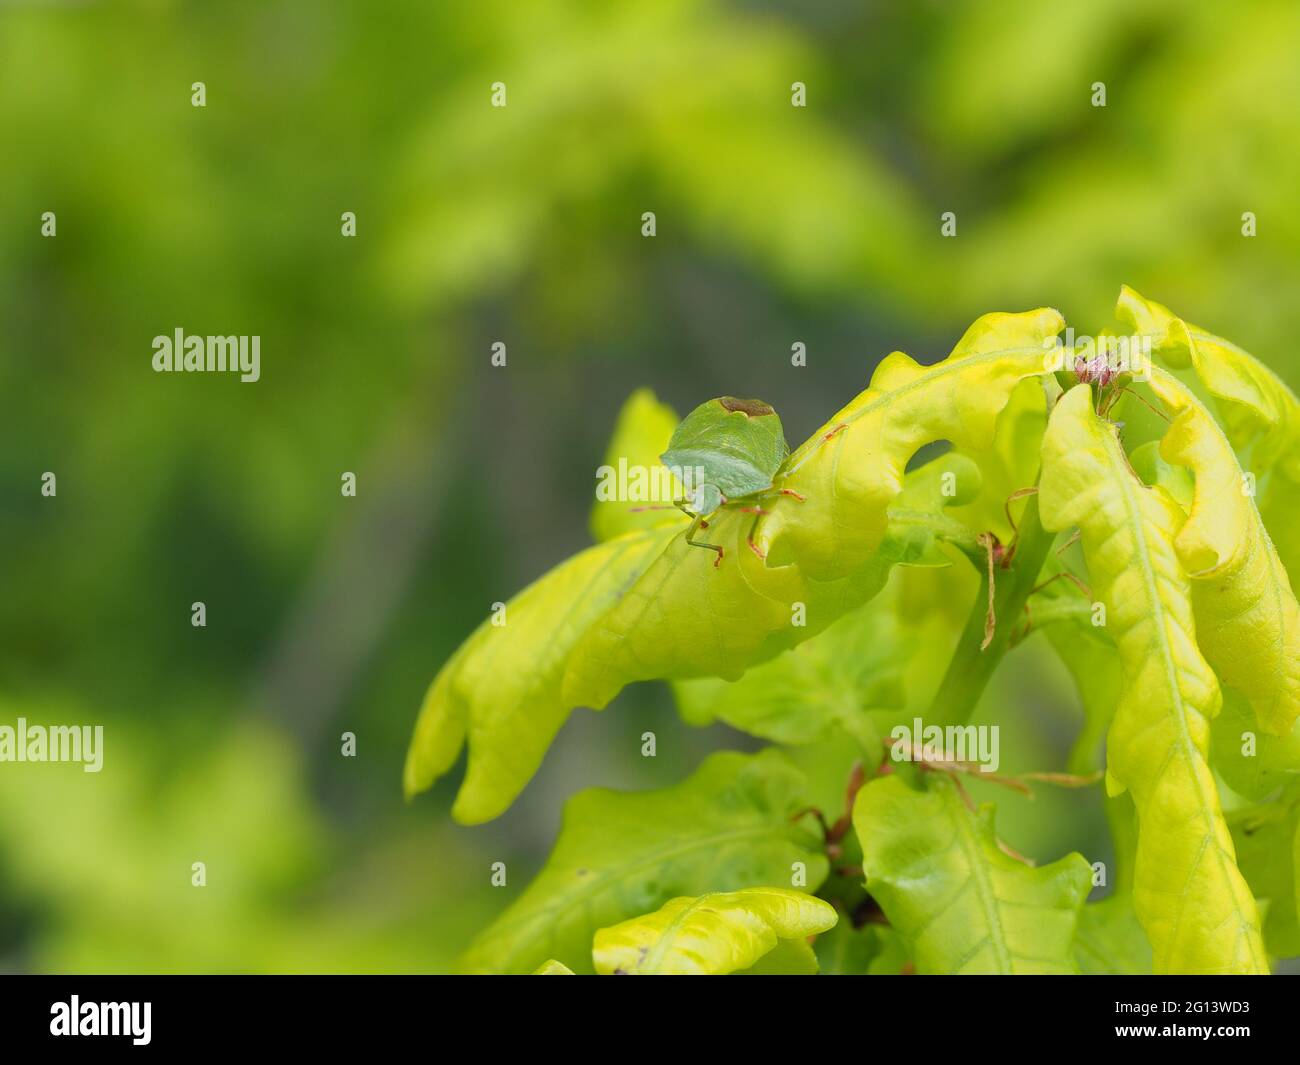 Green Shield or Green Stink bug on the leaves of an oak tree Stock Photo